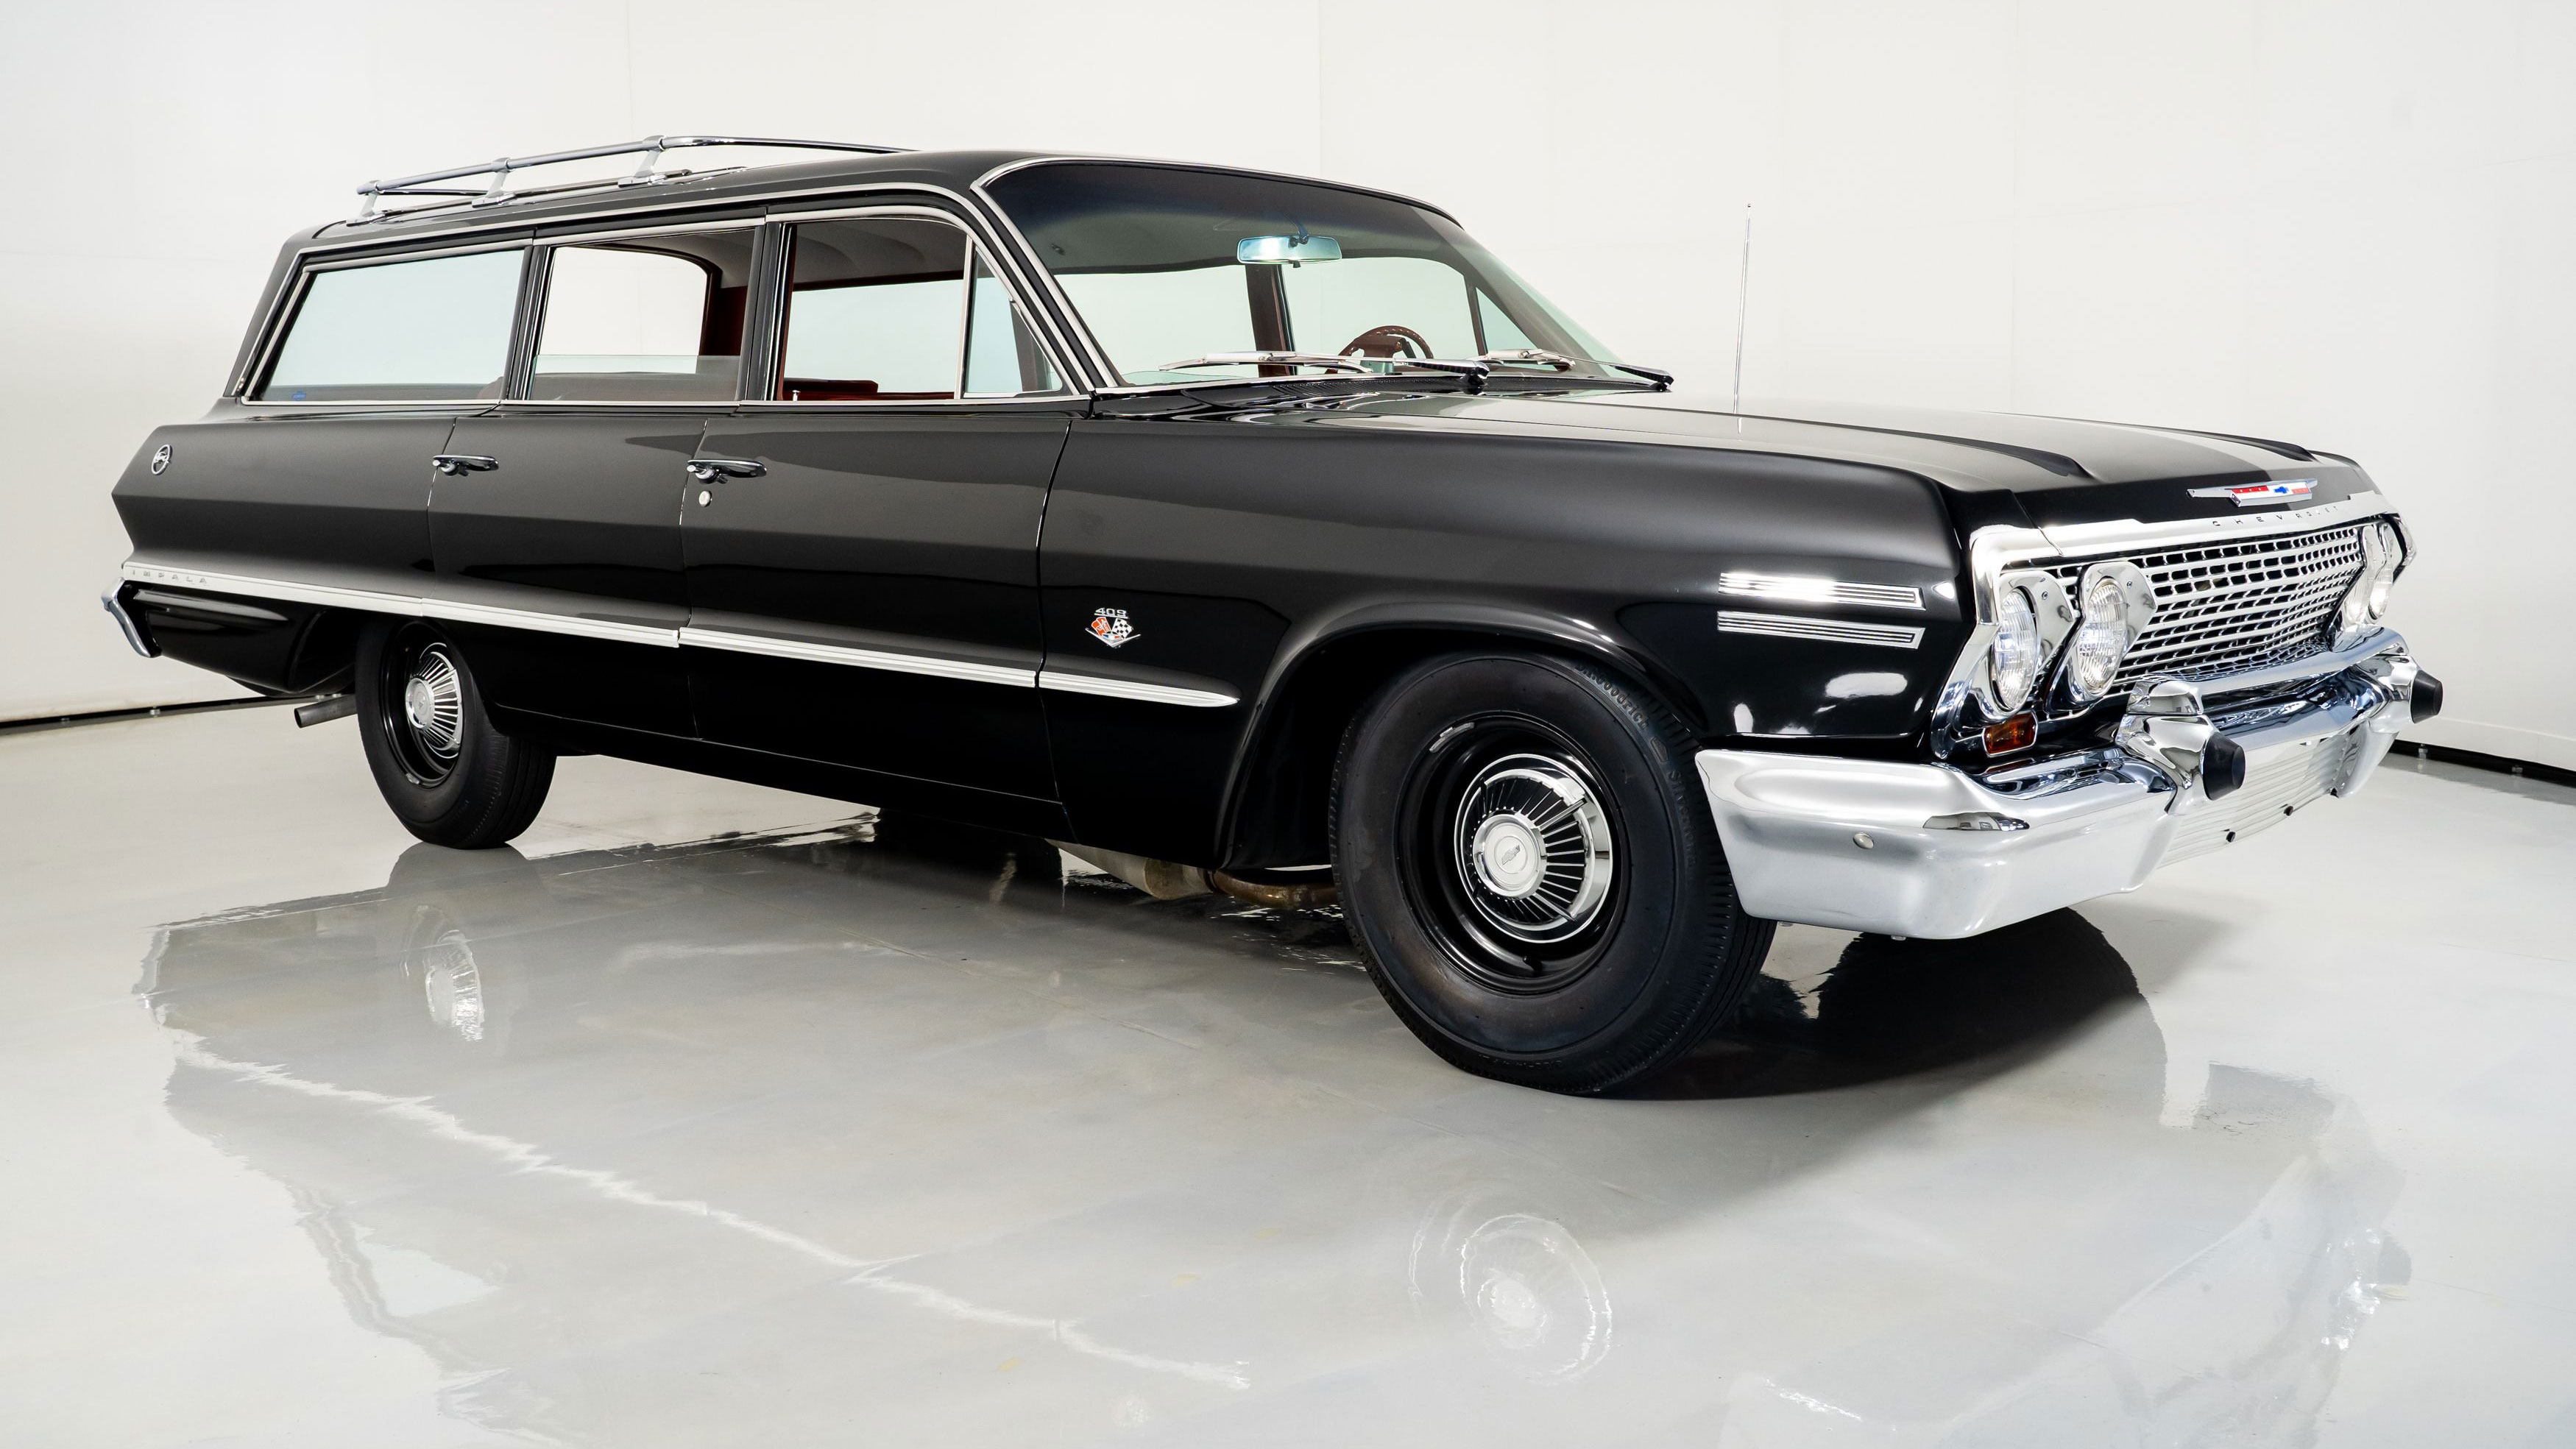 Rare 409-Powered 1963 Chevy Impala Wagon For Sale: Video